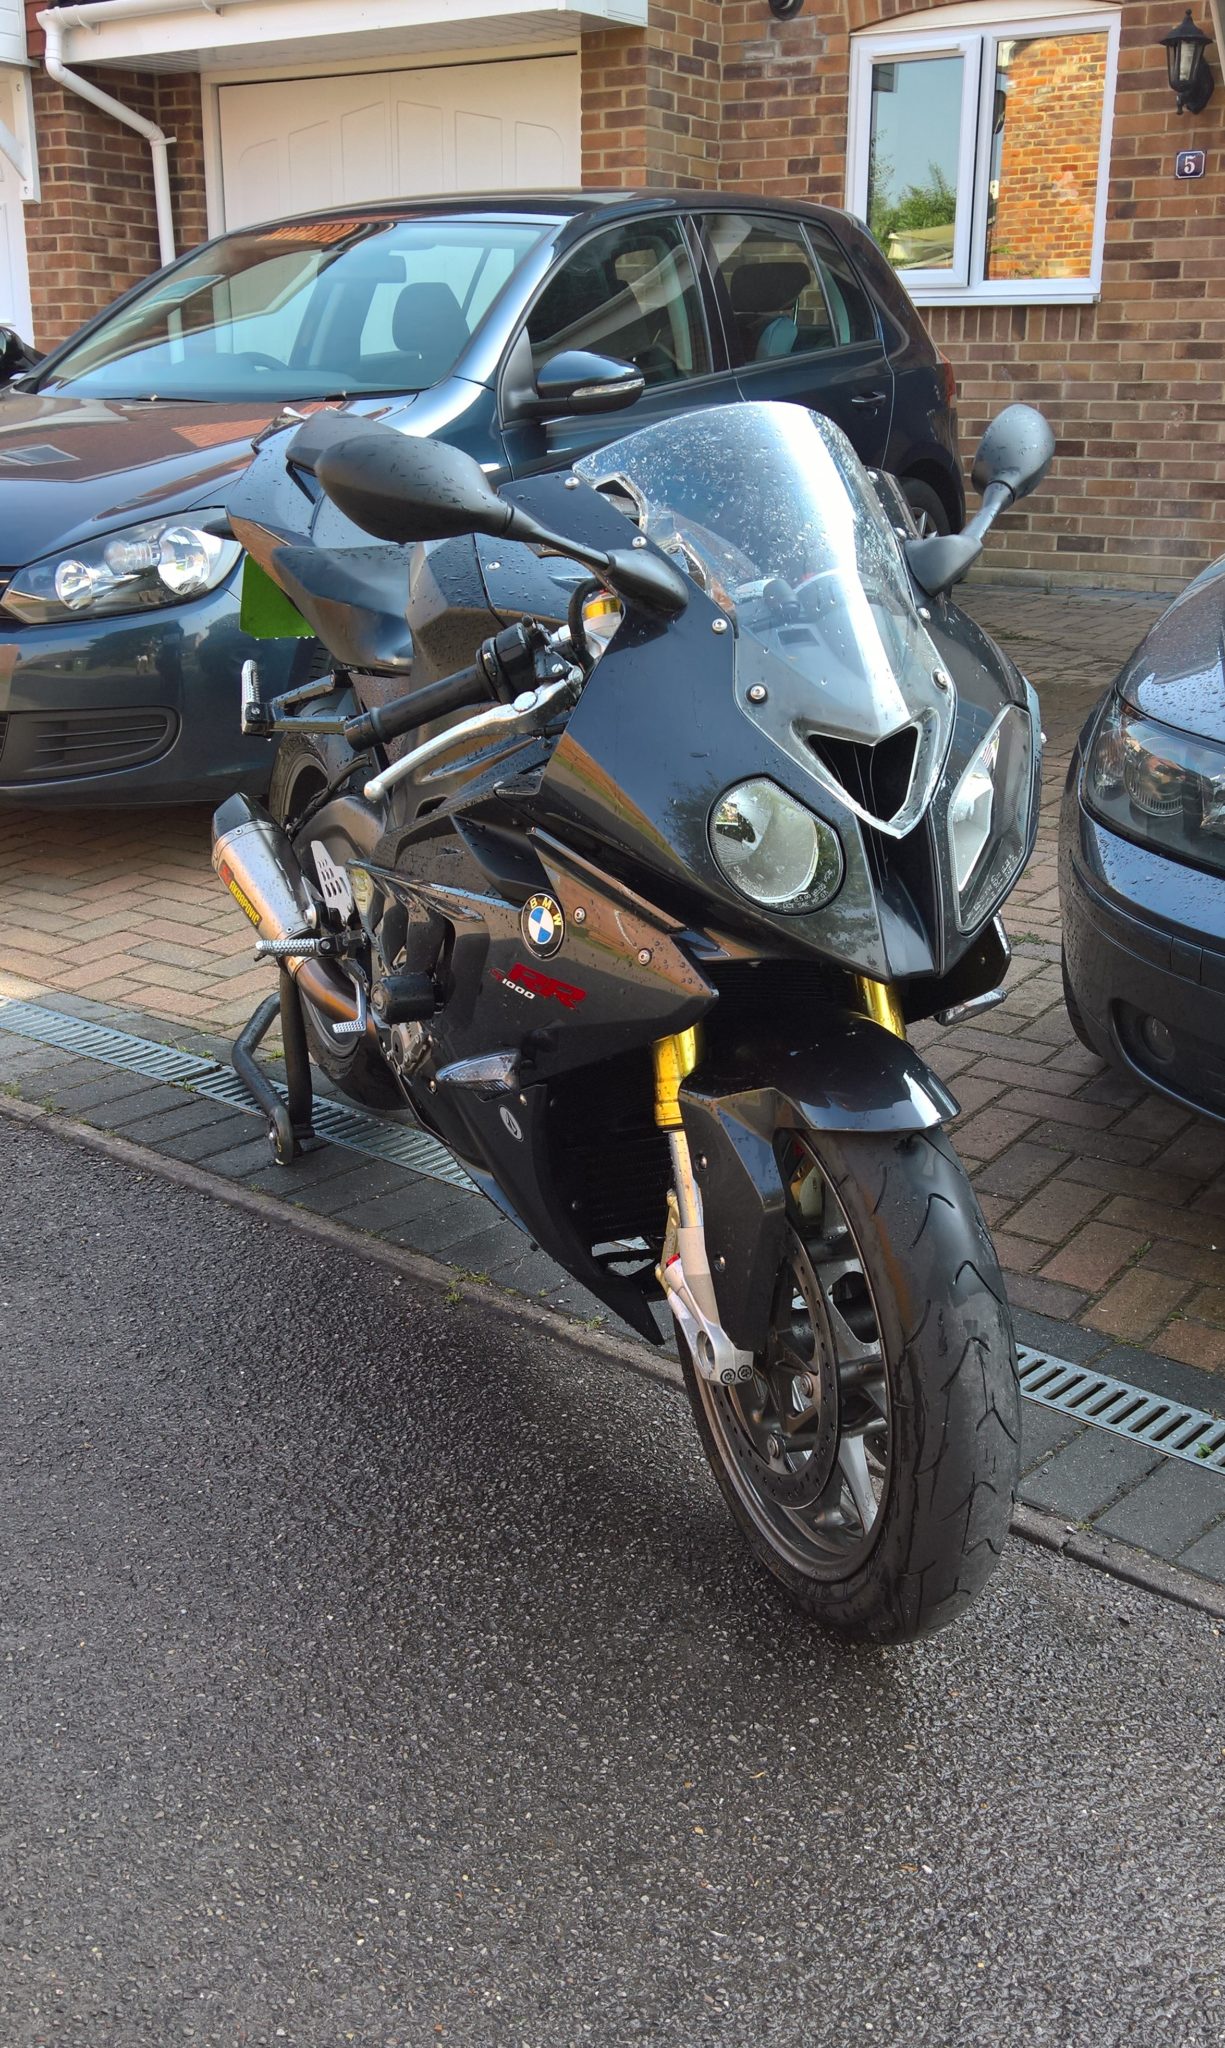 Mike – BMW S1000RR